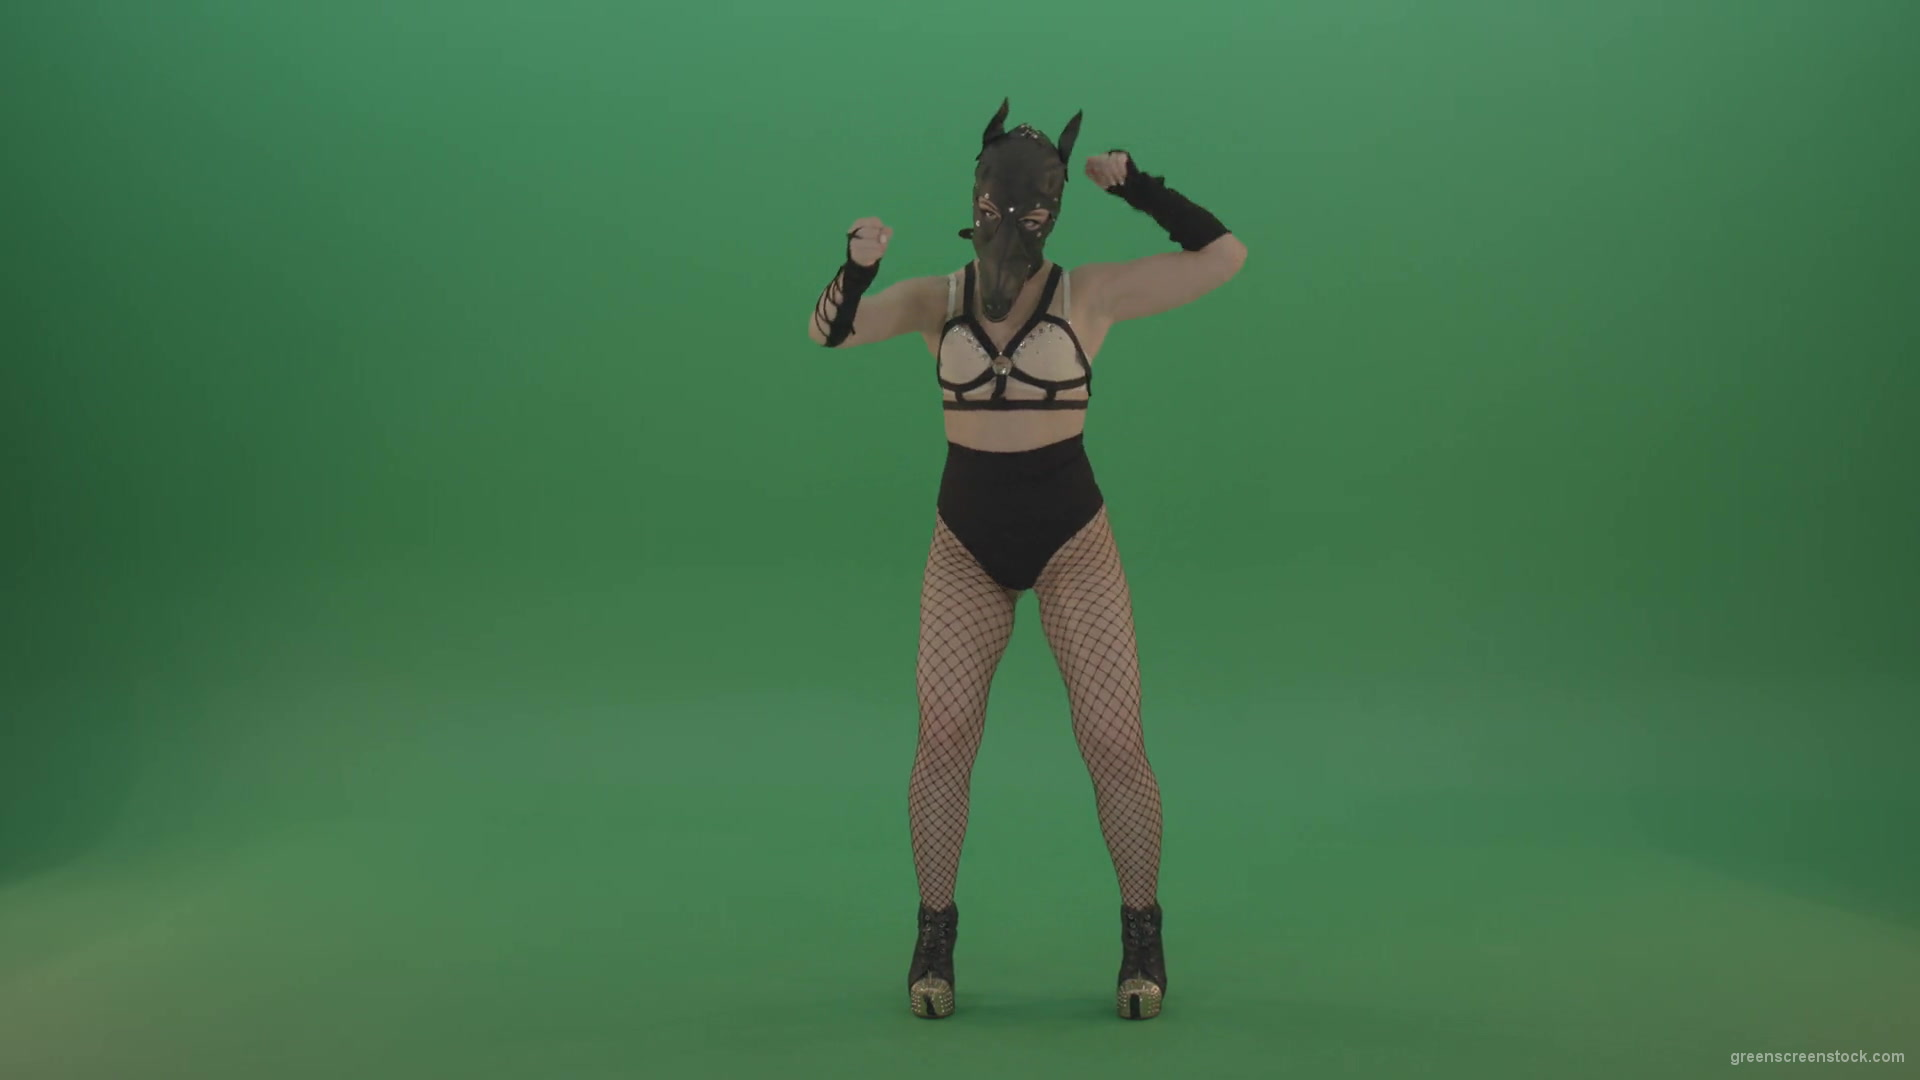 Girl-in-wolf-fetish-mask-sit-down-and-stand-up-making-hand-beat-on-green-screen-1920_006 Green Screen Stock